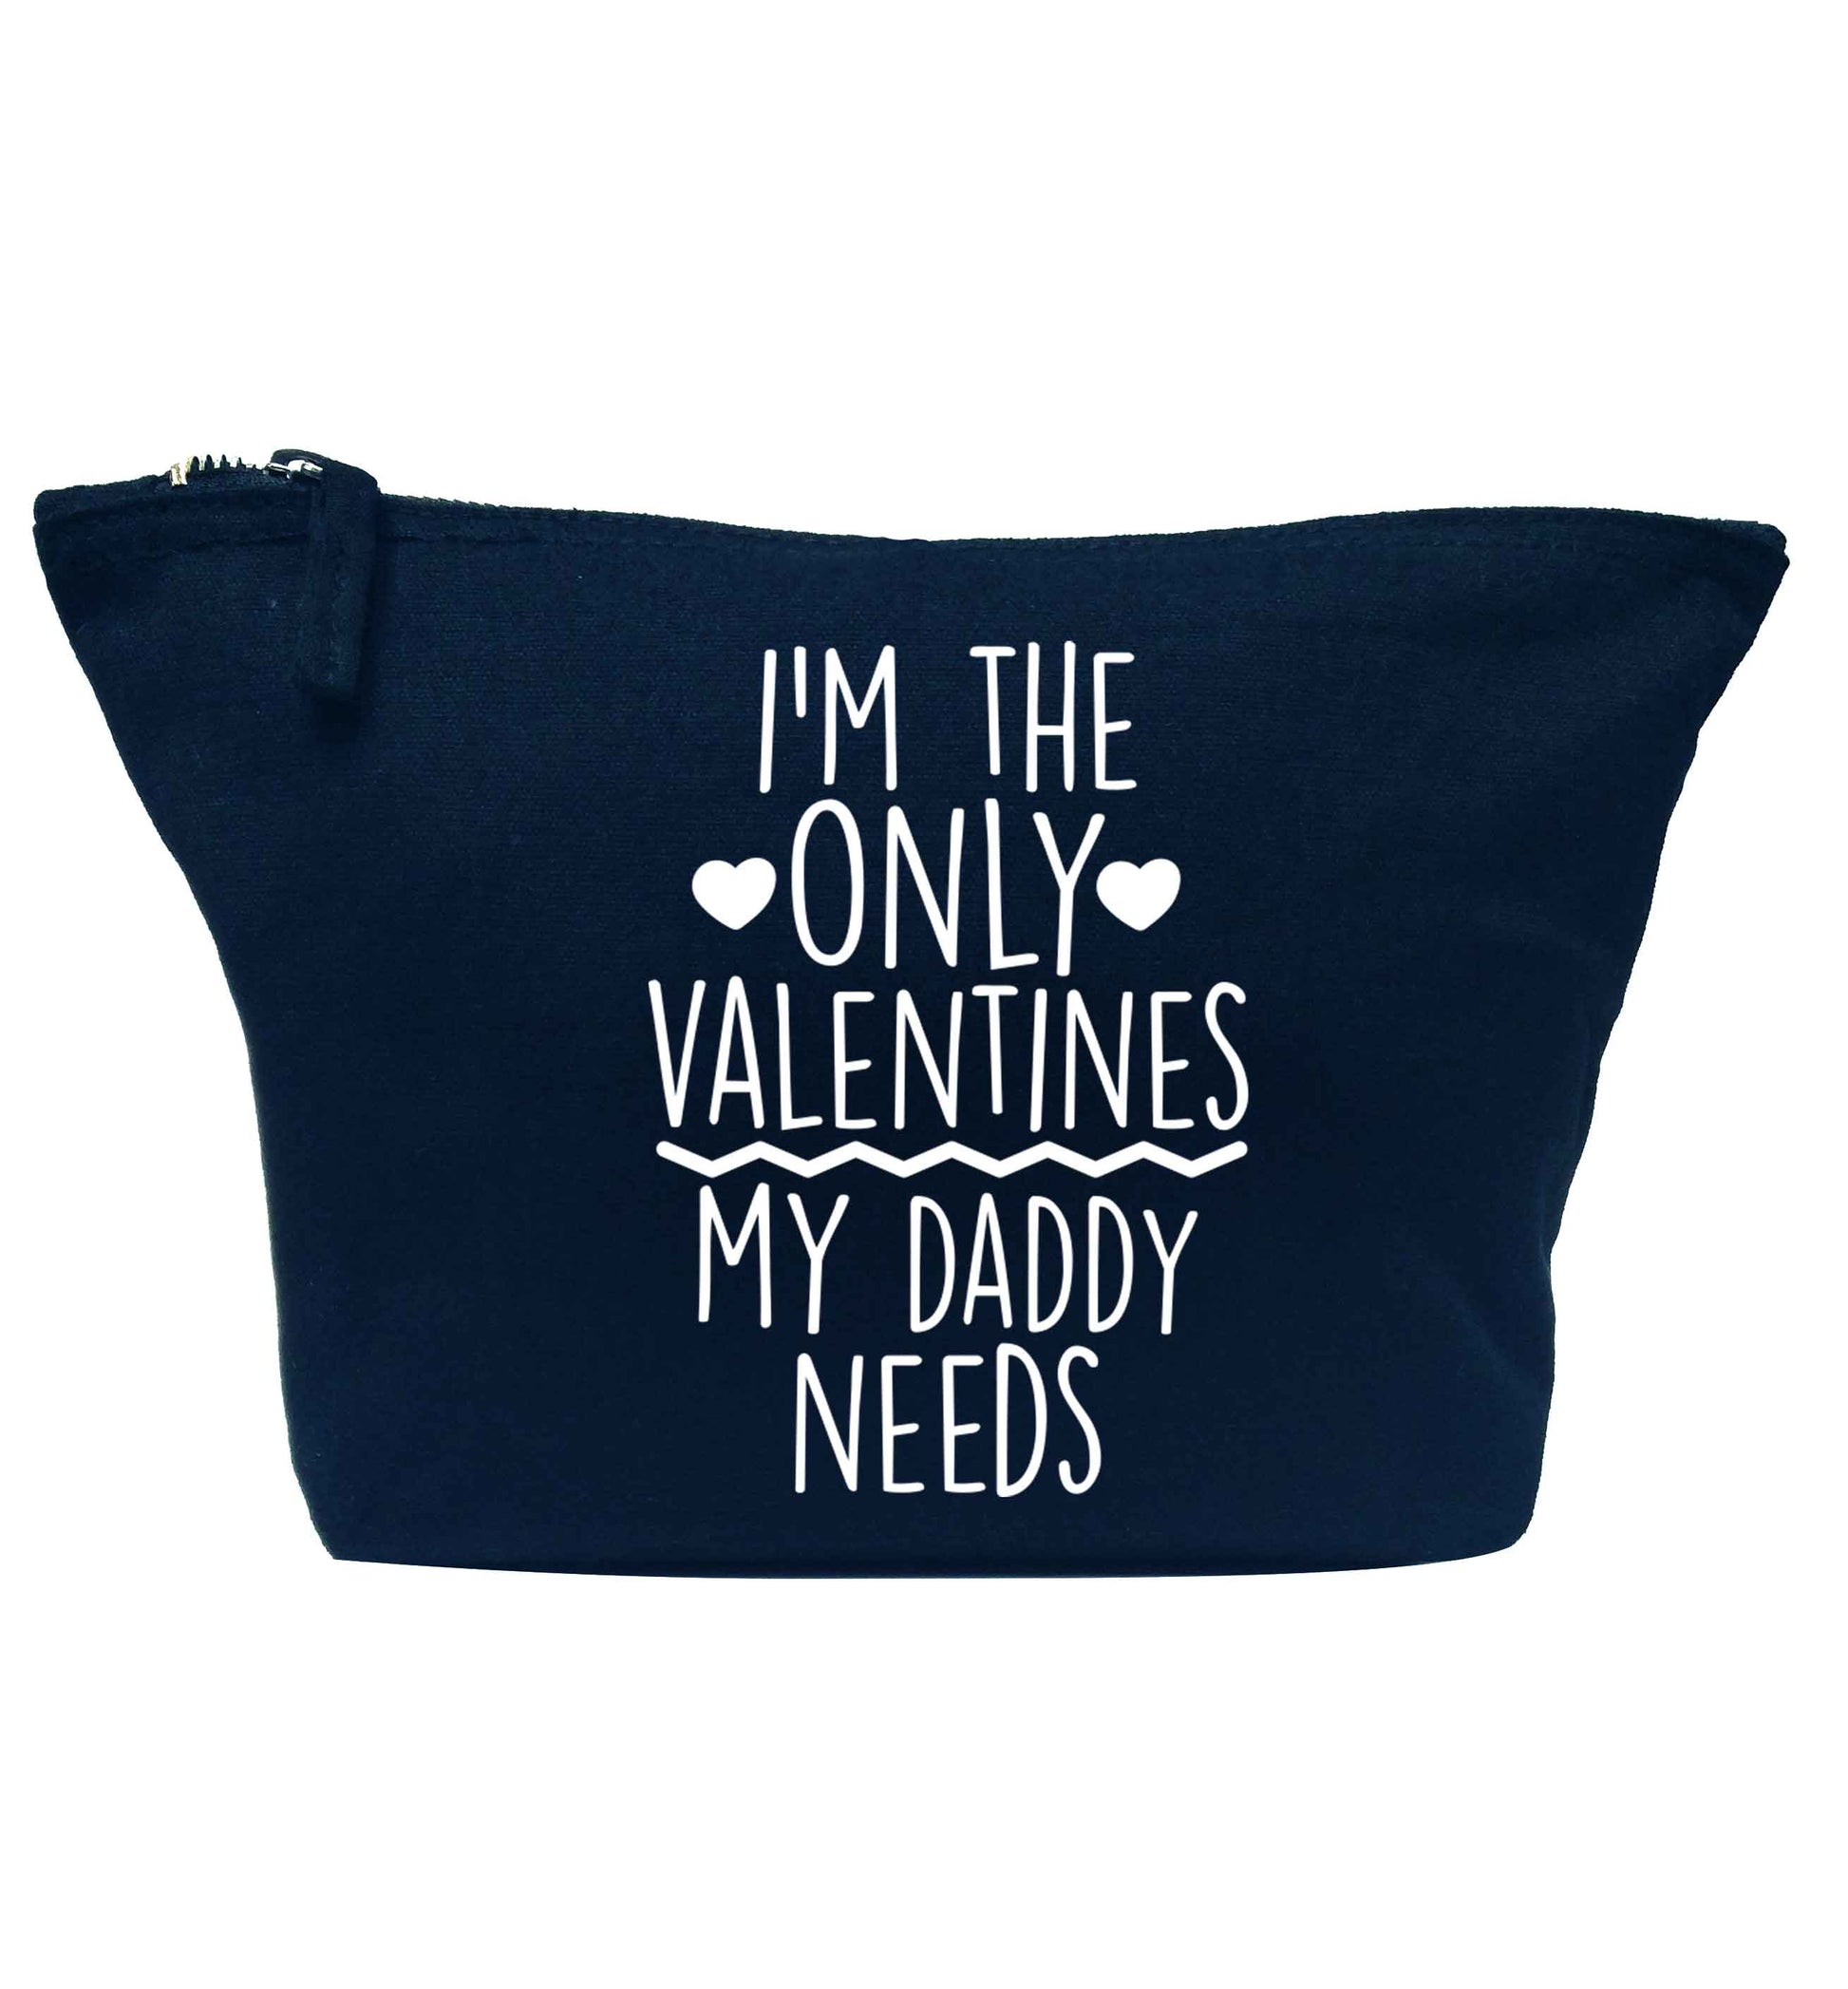 I'm the only valentines my daddy needs navy makeup bag